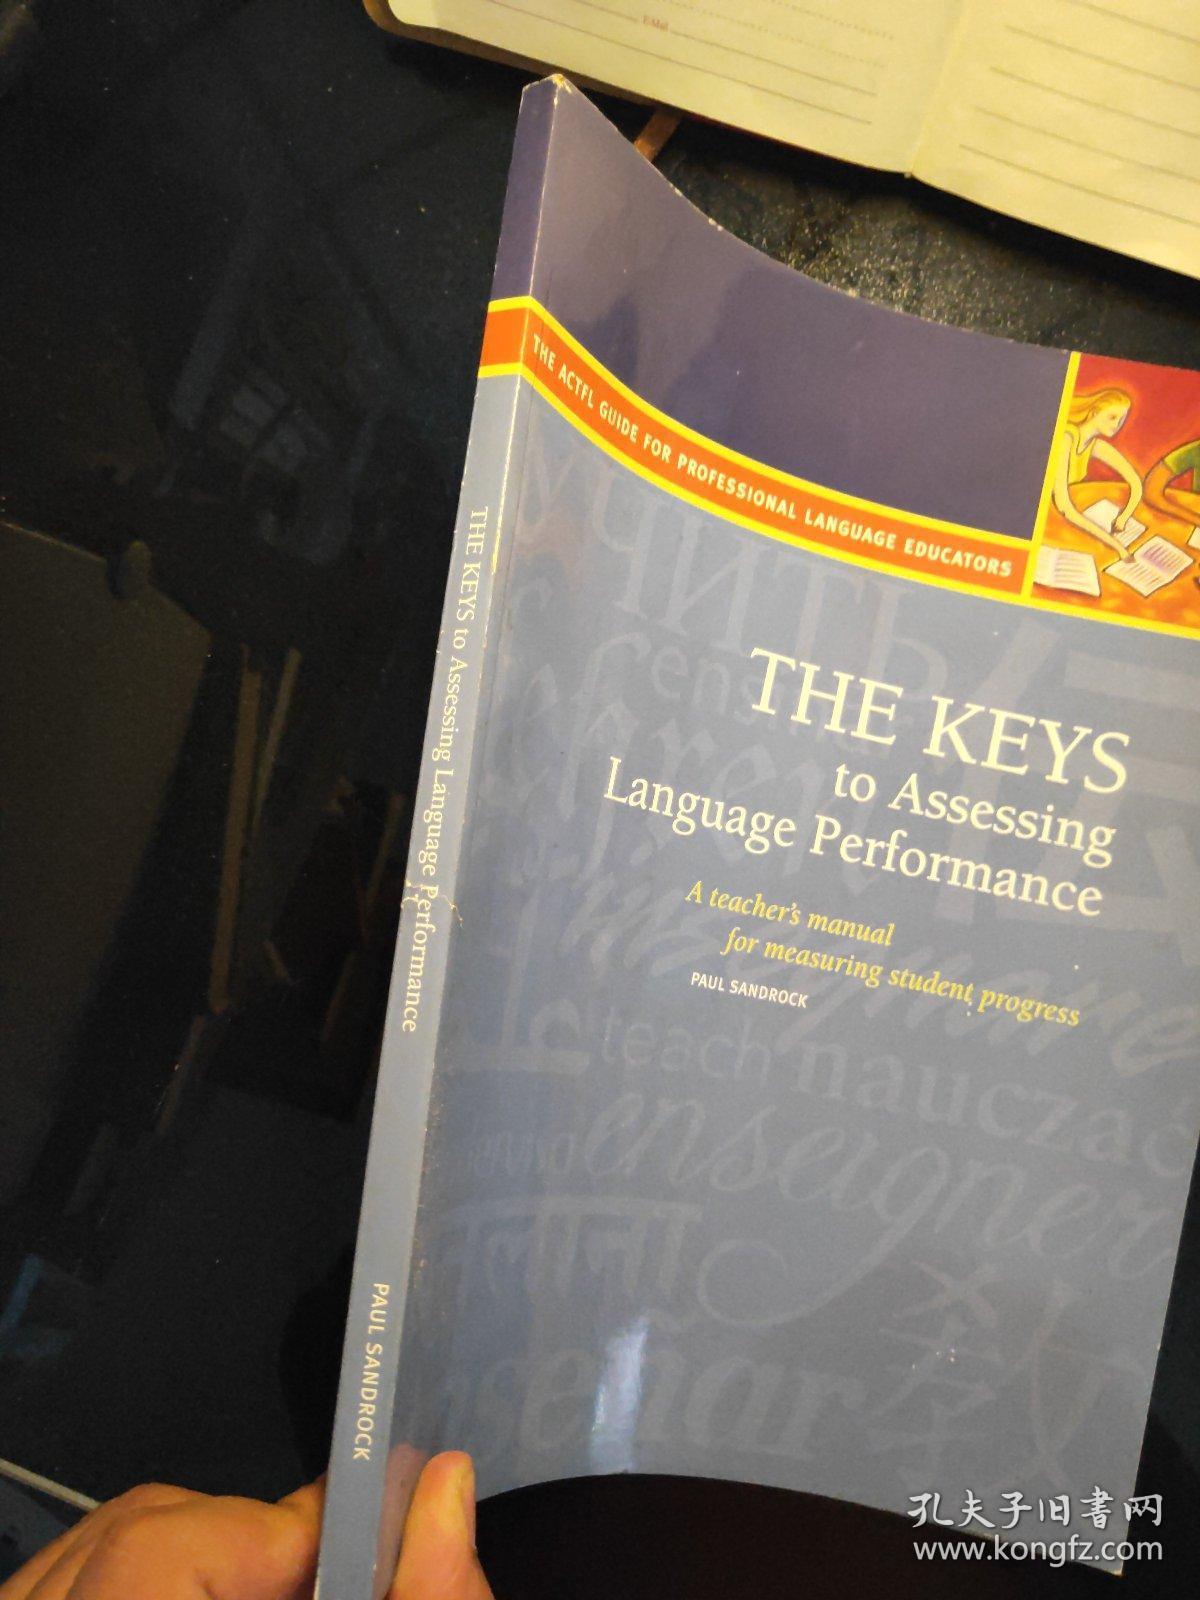 THE KEYS  to Assessing Language Performance A Teacher's Manual for Measuring Student Progress. Second Edition